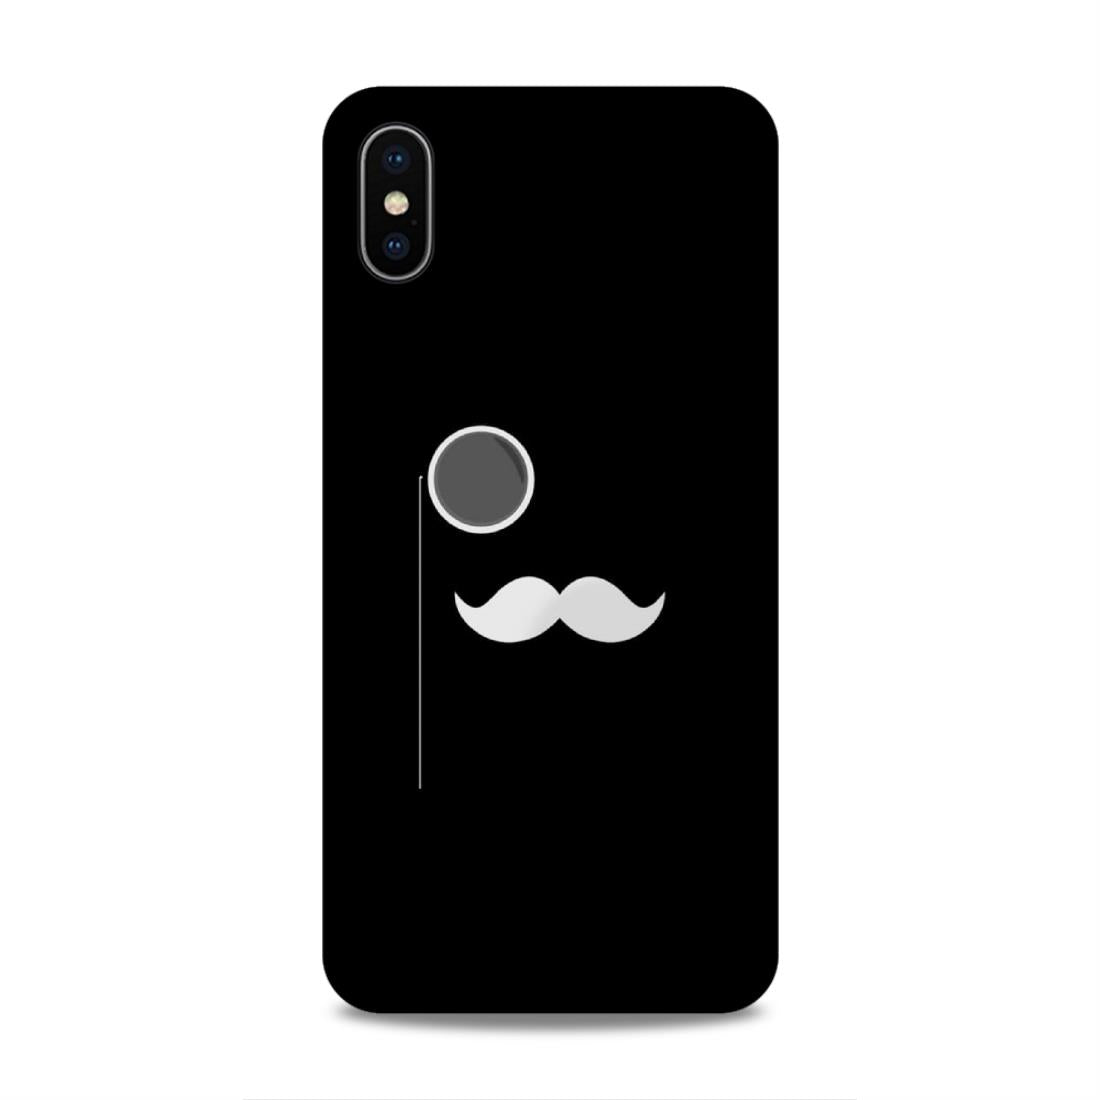 Spect and Mustache Hard Back Case For Apple iPhone XS Max